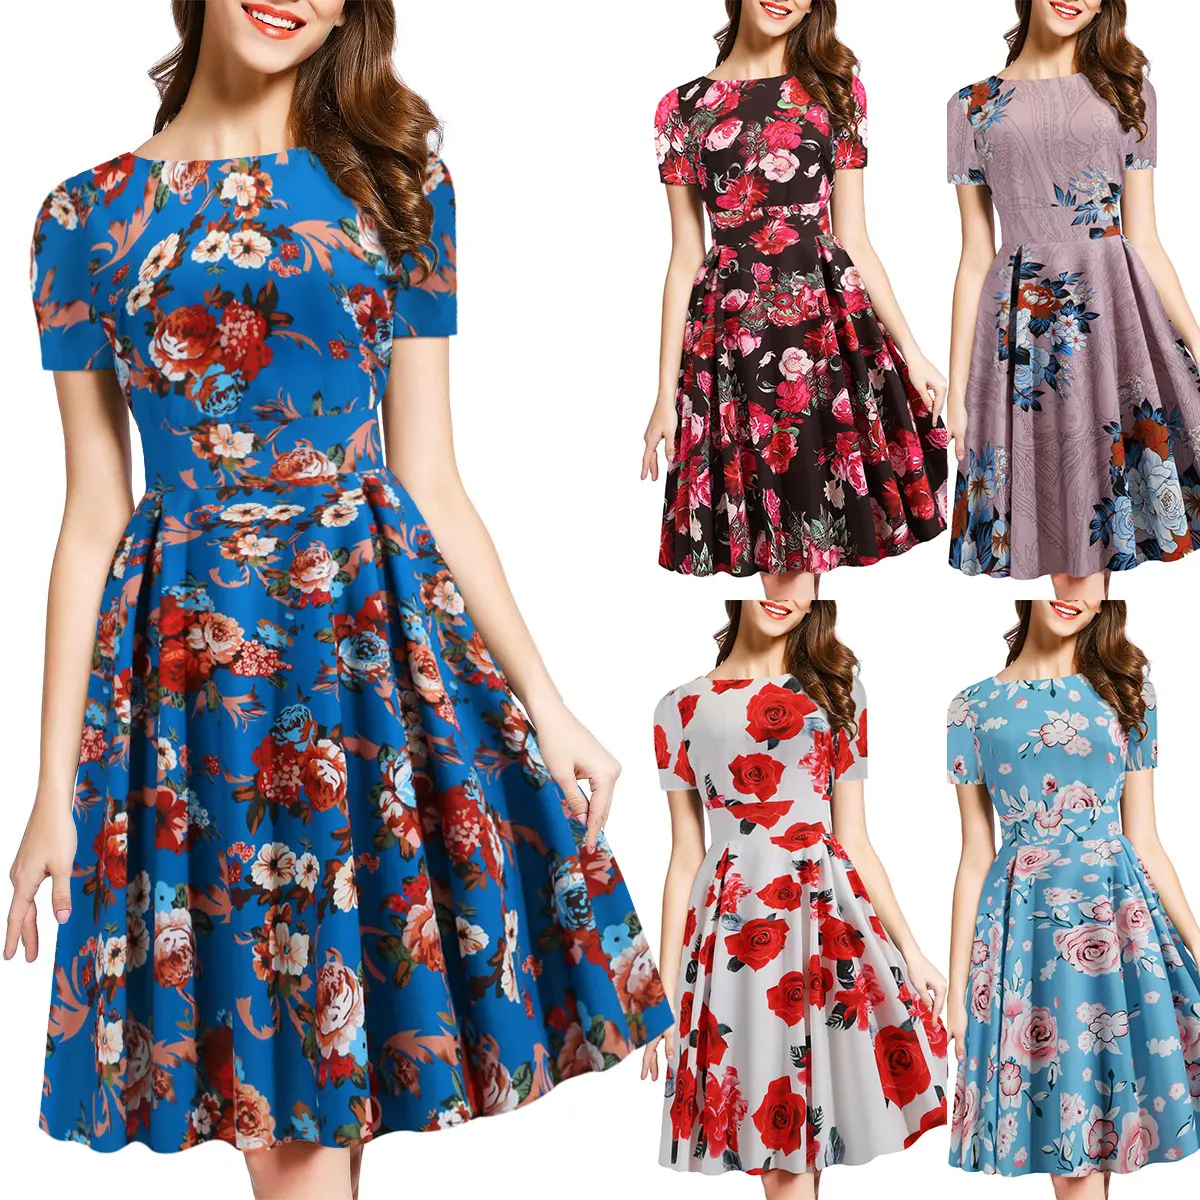 Short sleeve floral lady party dresses for women 2022 Summer retro Hepburn style printed round neck big swing dress